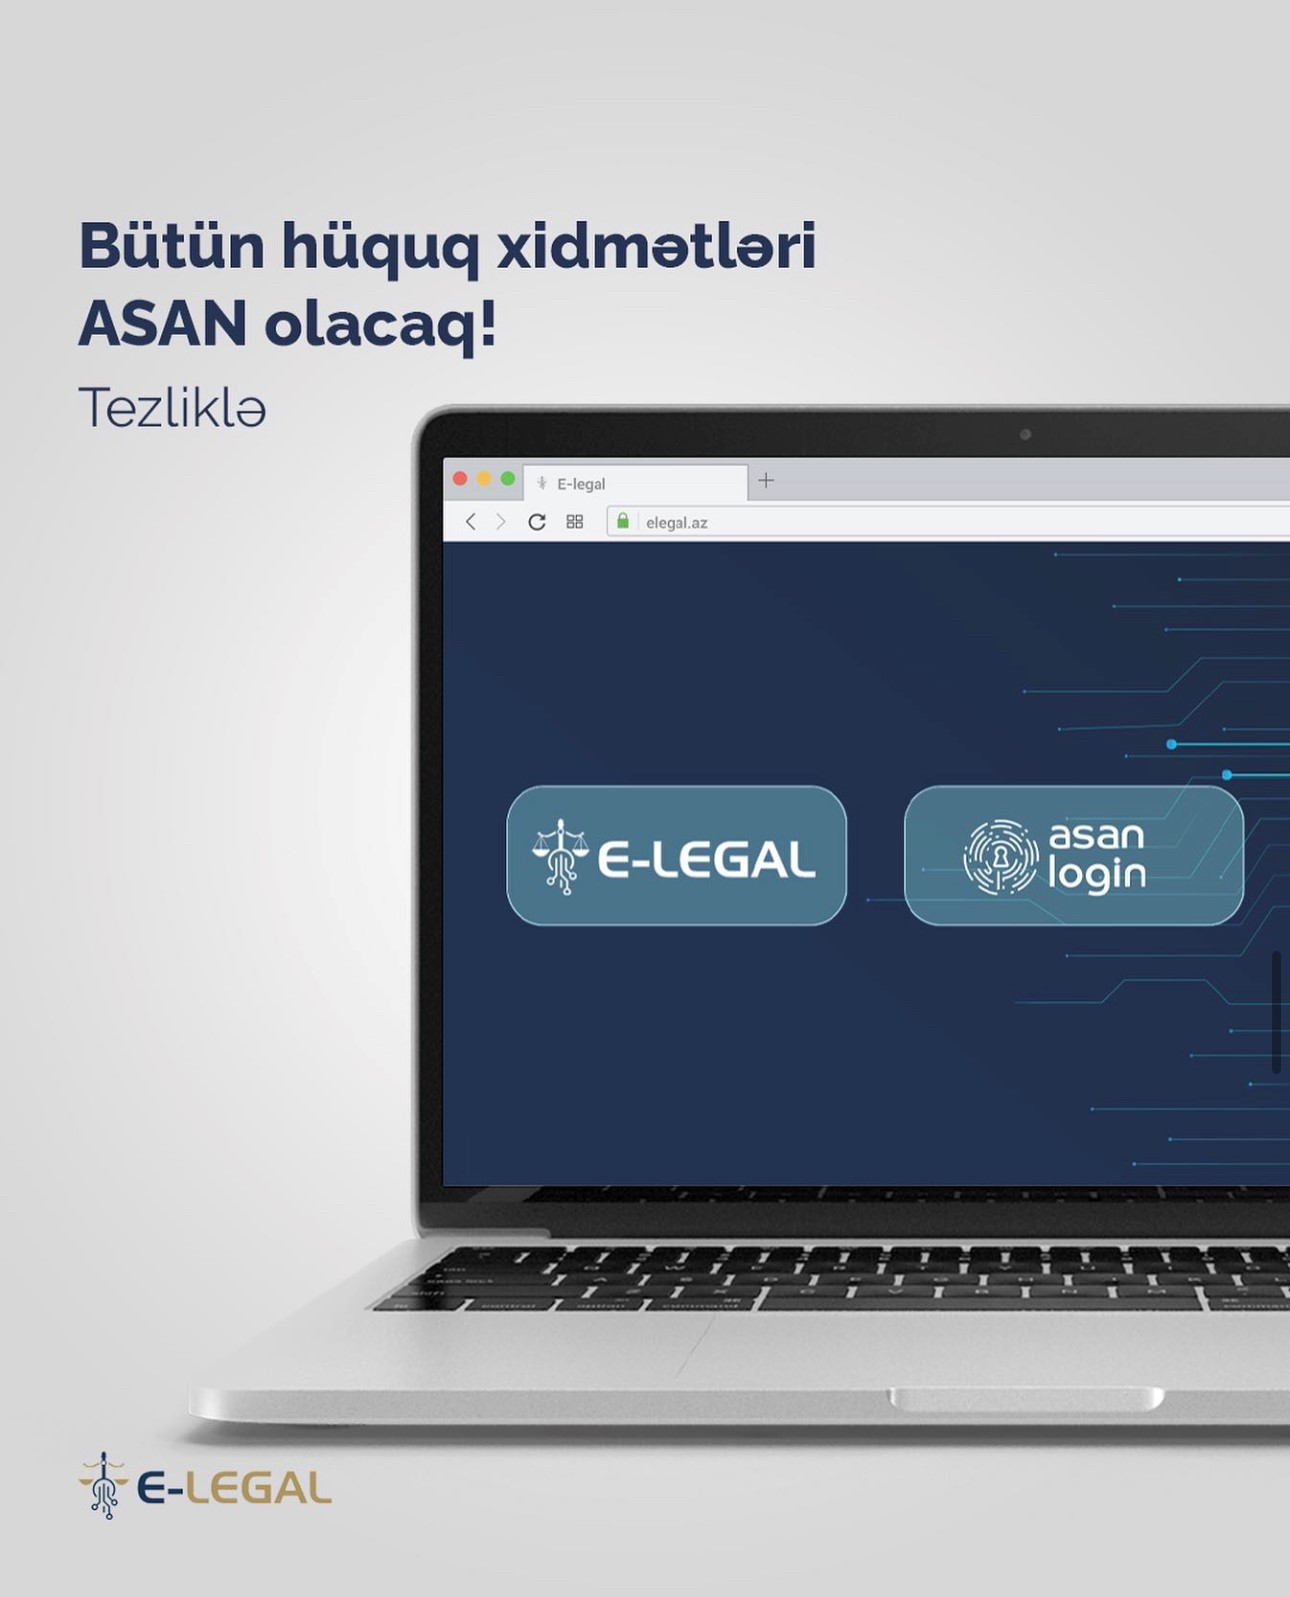 E-LEGAL signed an agreement with the Electronic Government Center (Innovation and Digital Developmen